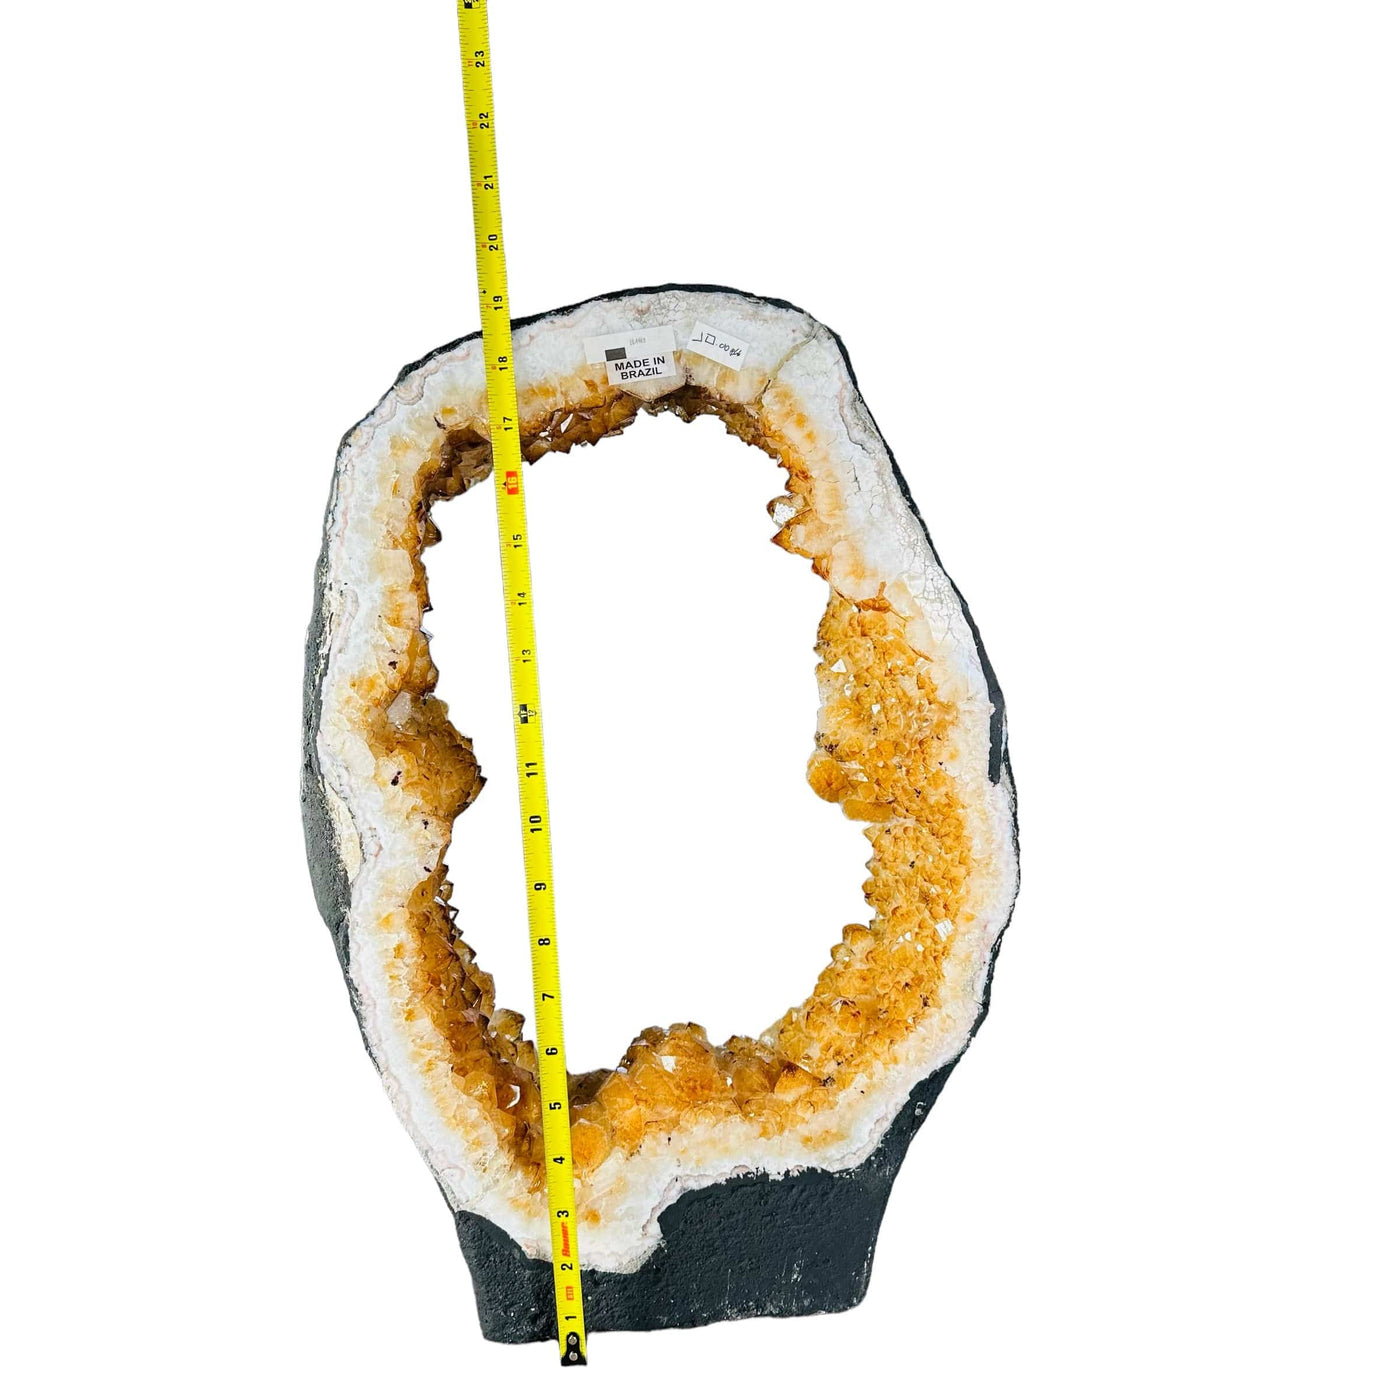 Citrine Crystal Portal cut base next to a ruler for size reference 